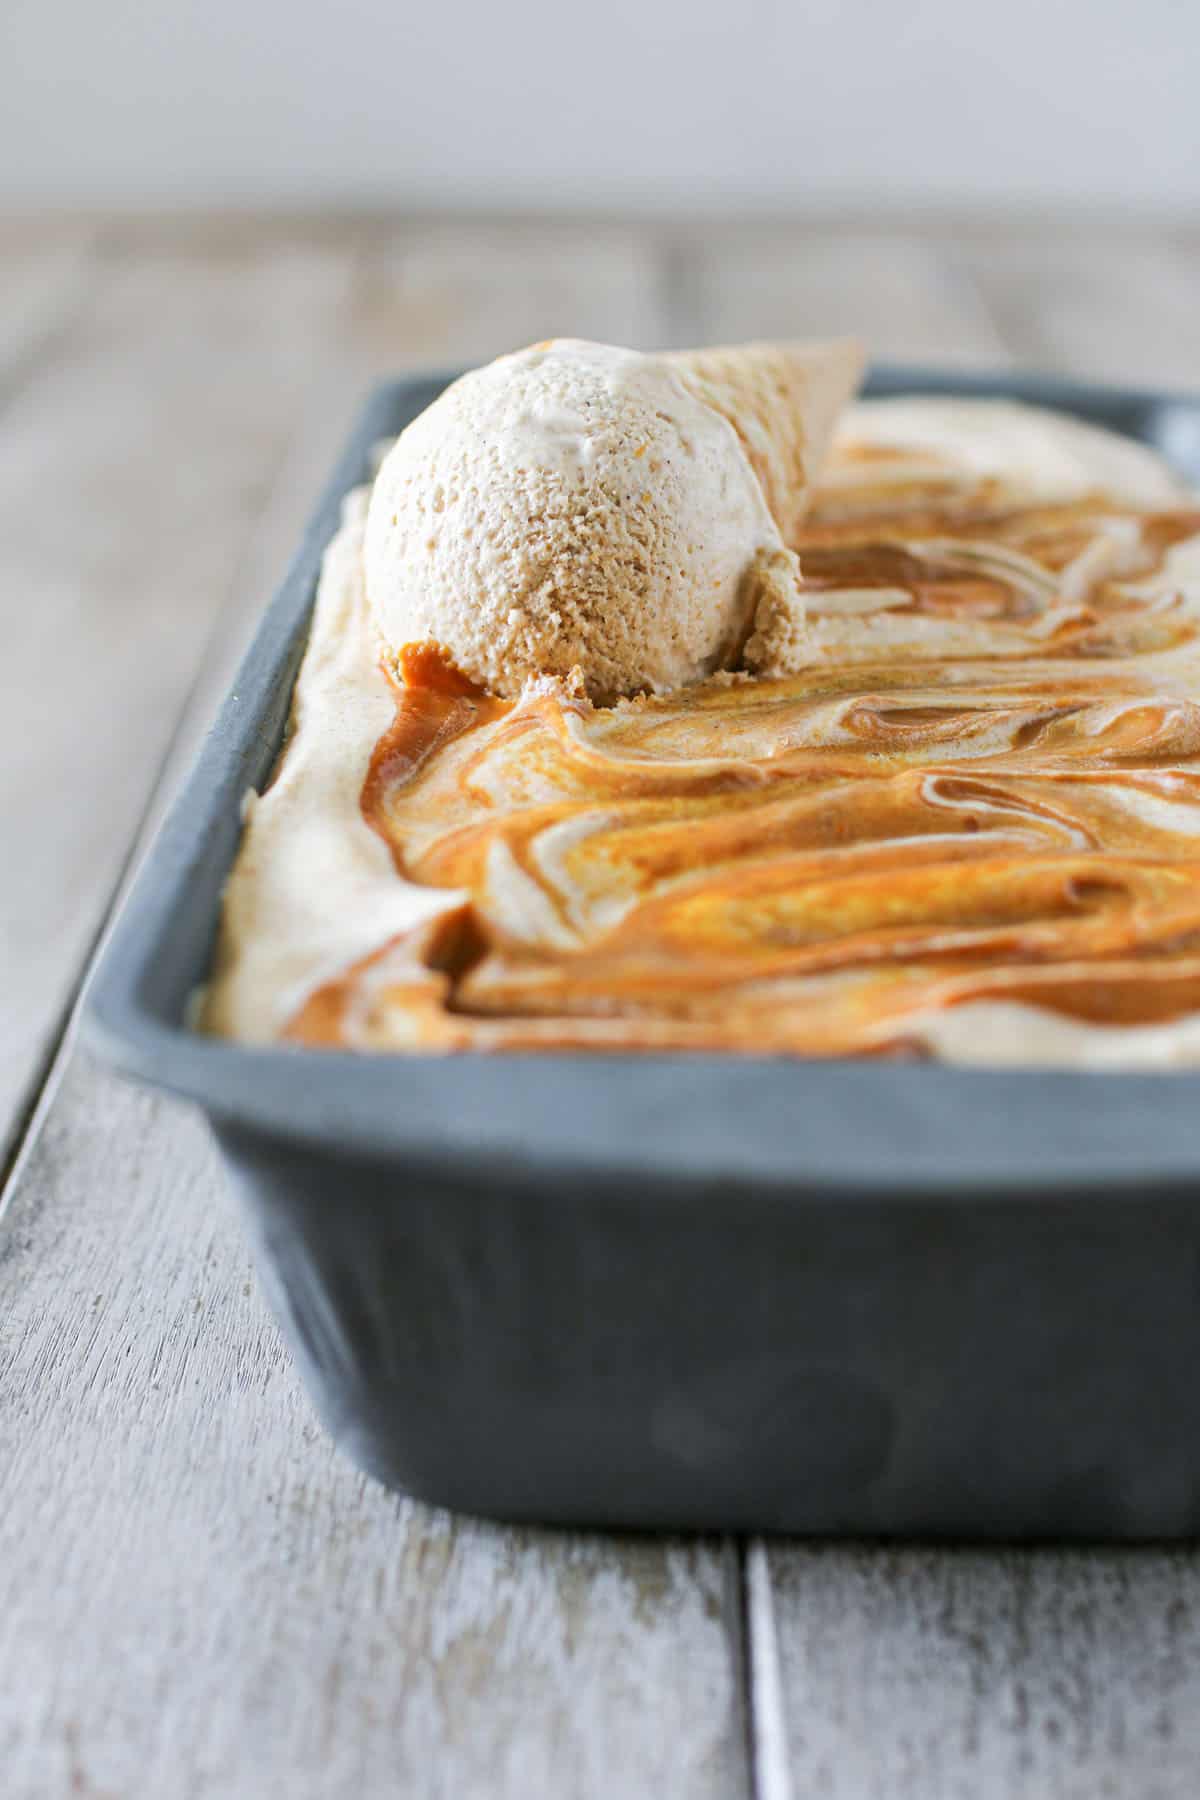 Side view of metal loaf pan with No Churn Pumpkin Ice Cream with a scoop on a sugar cone on top of the ice cream. The loaf pan sits on a wood plank background.